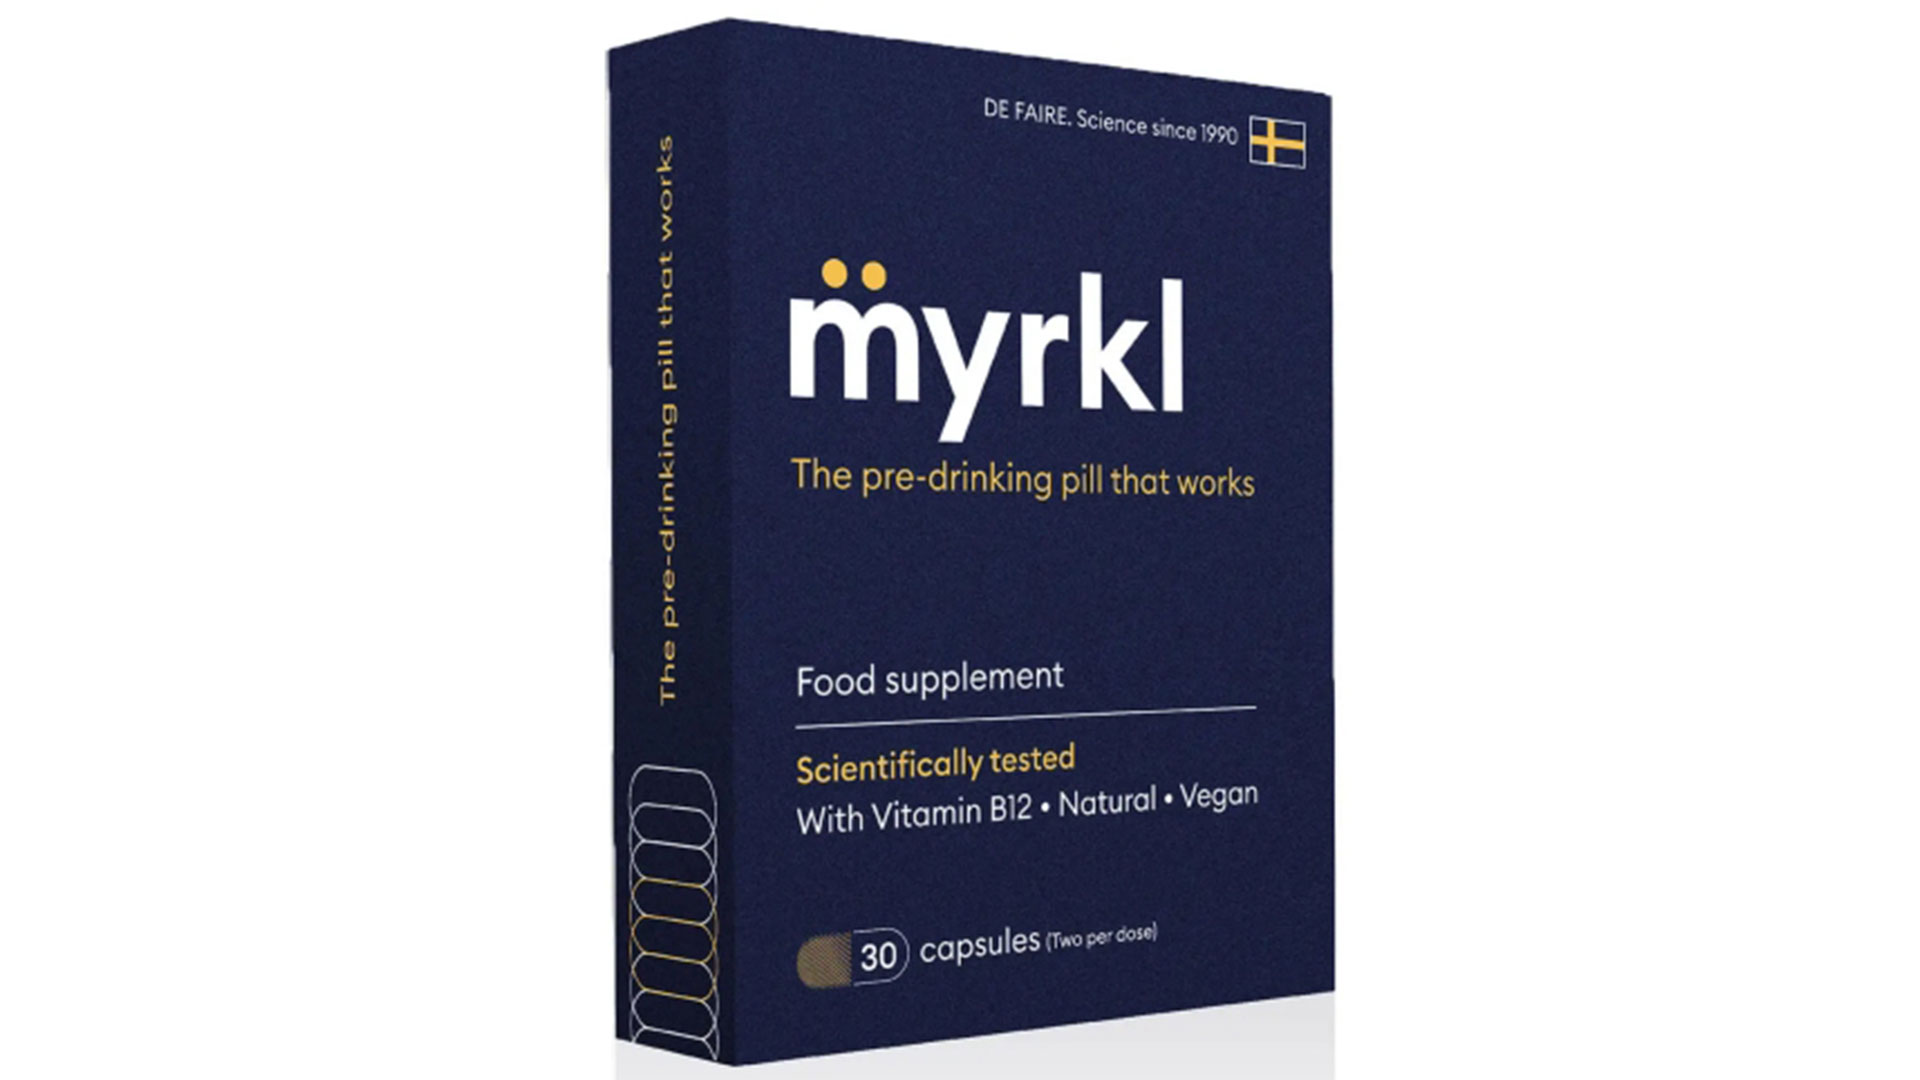 What is Myrkl? How does it work?